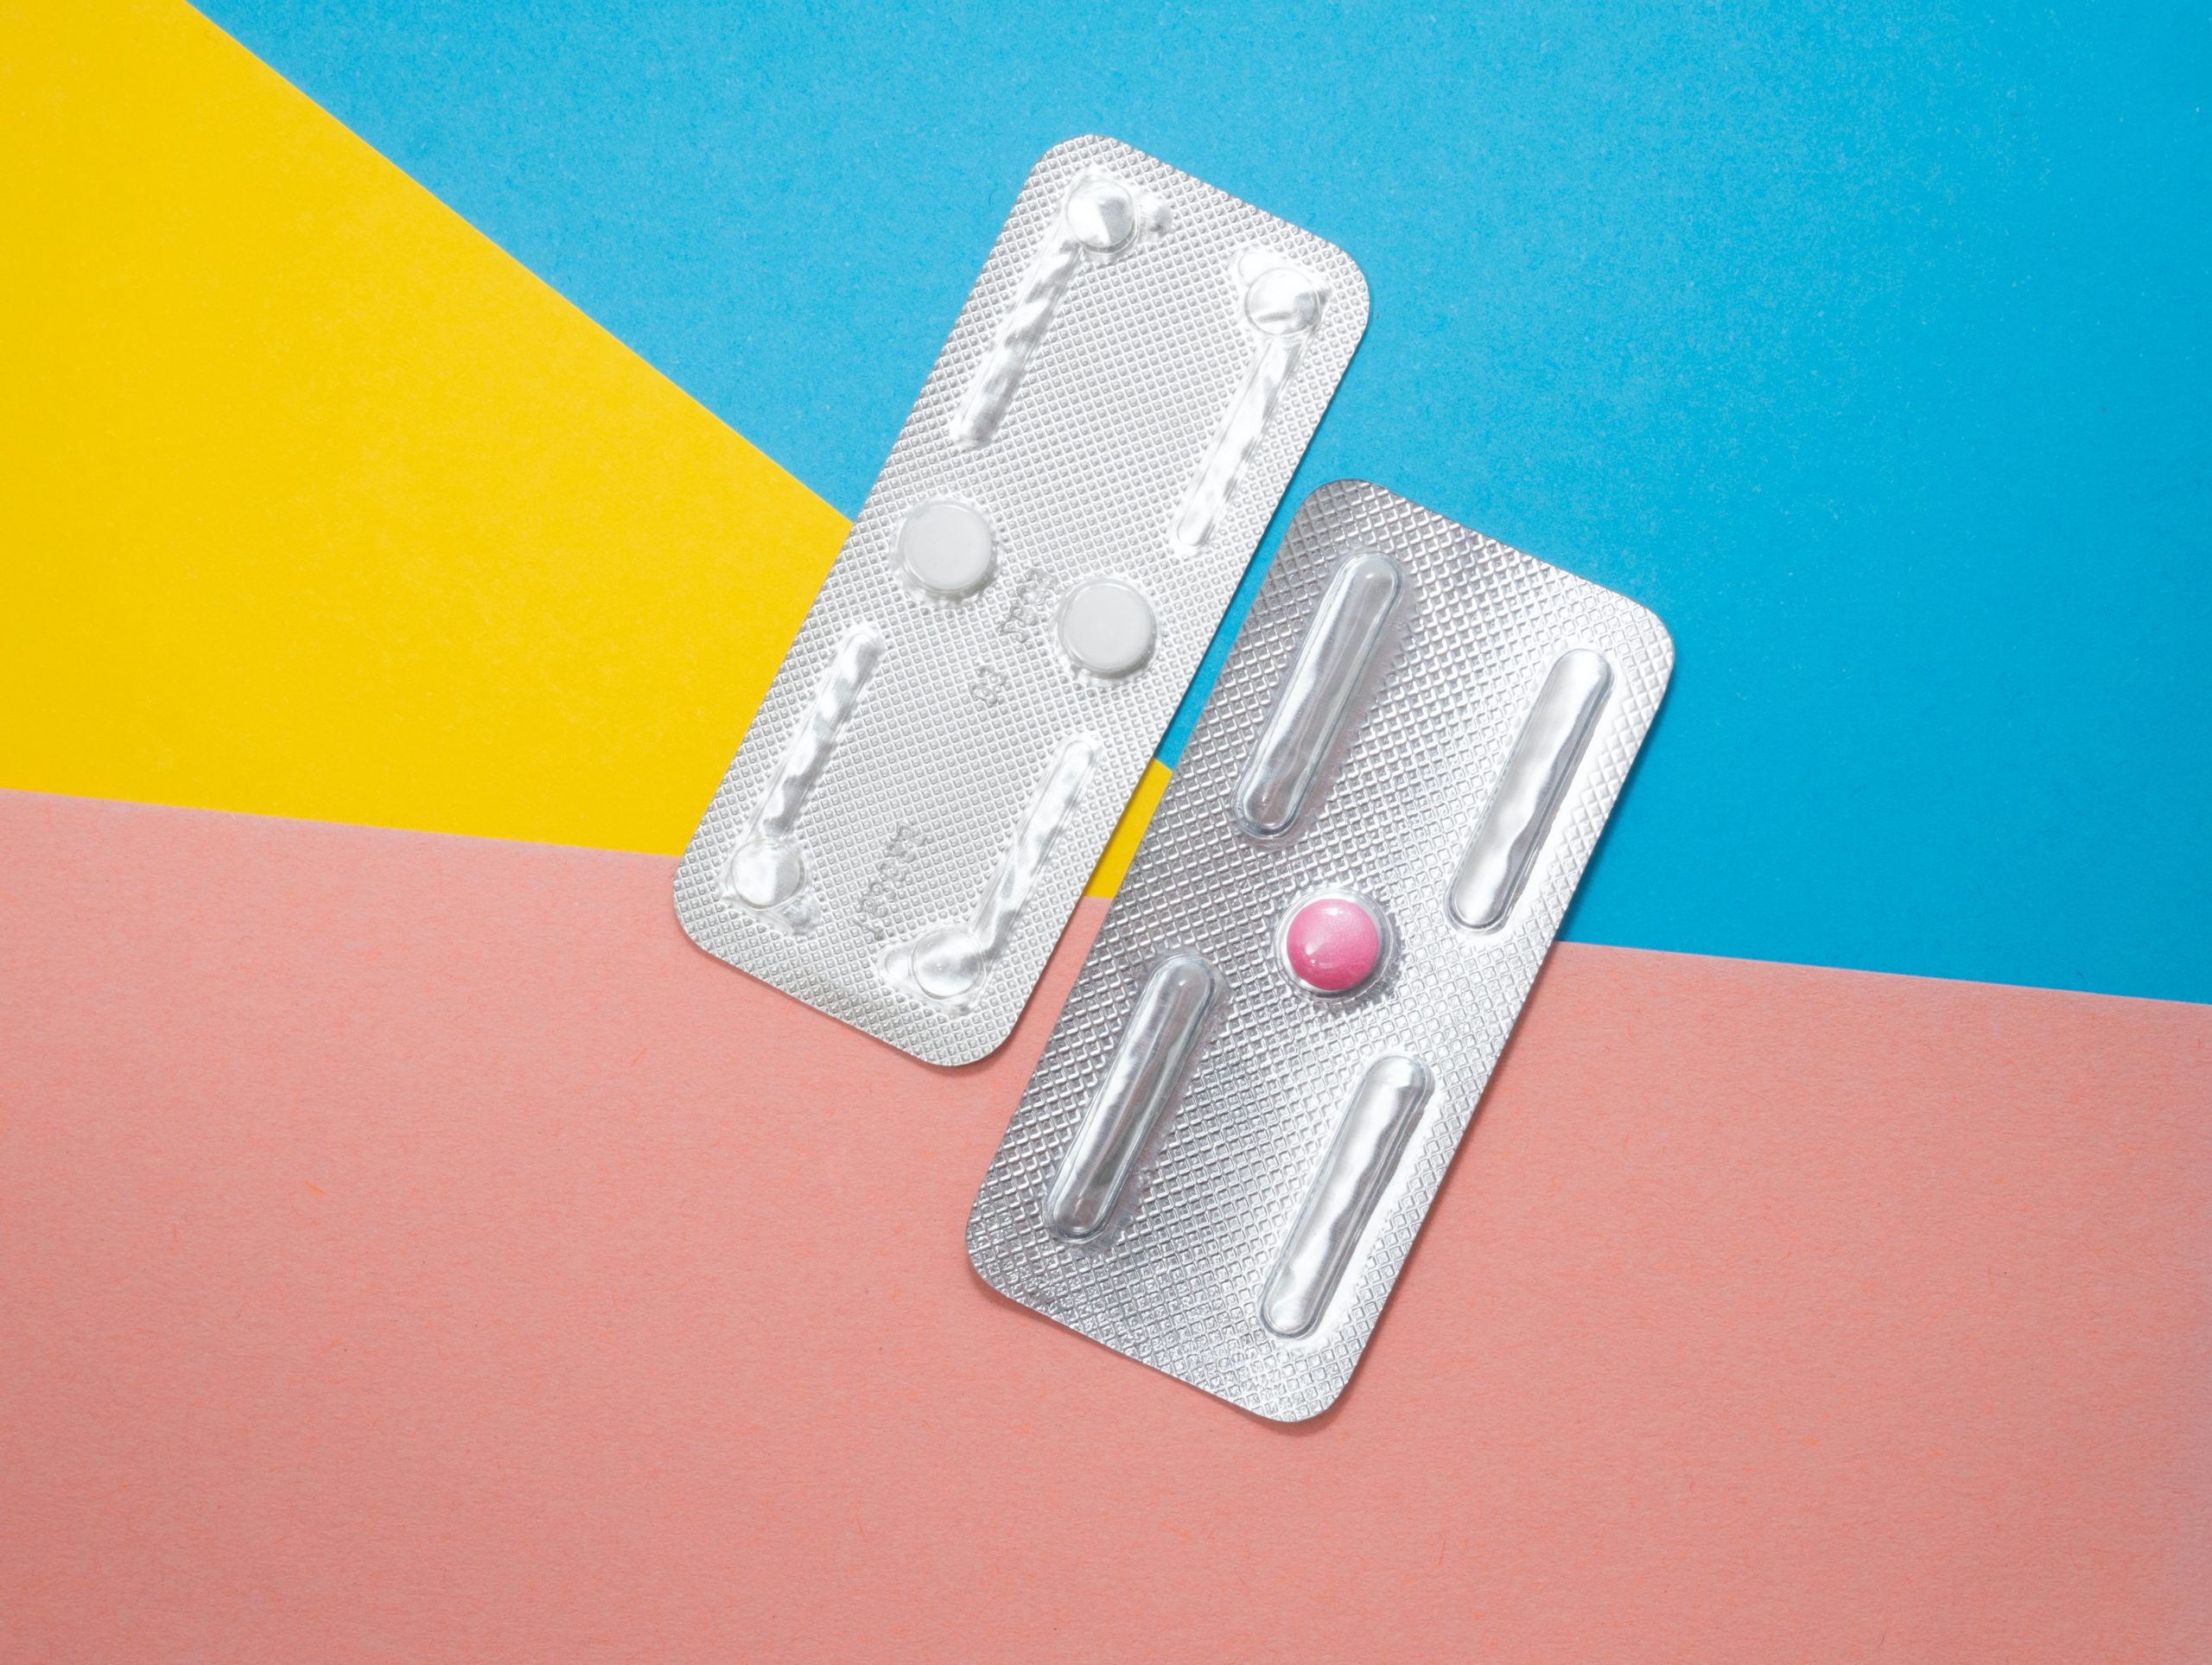 image of emergency contraception pill in wrapper on a geometric background